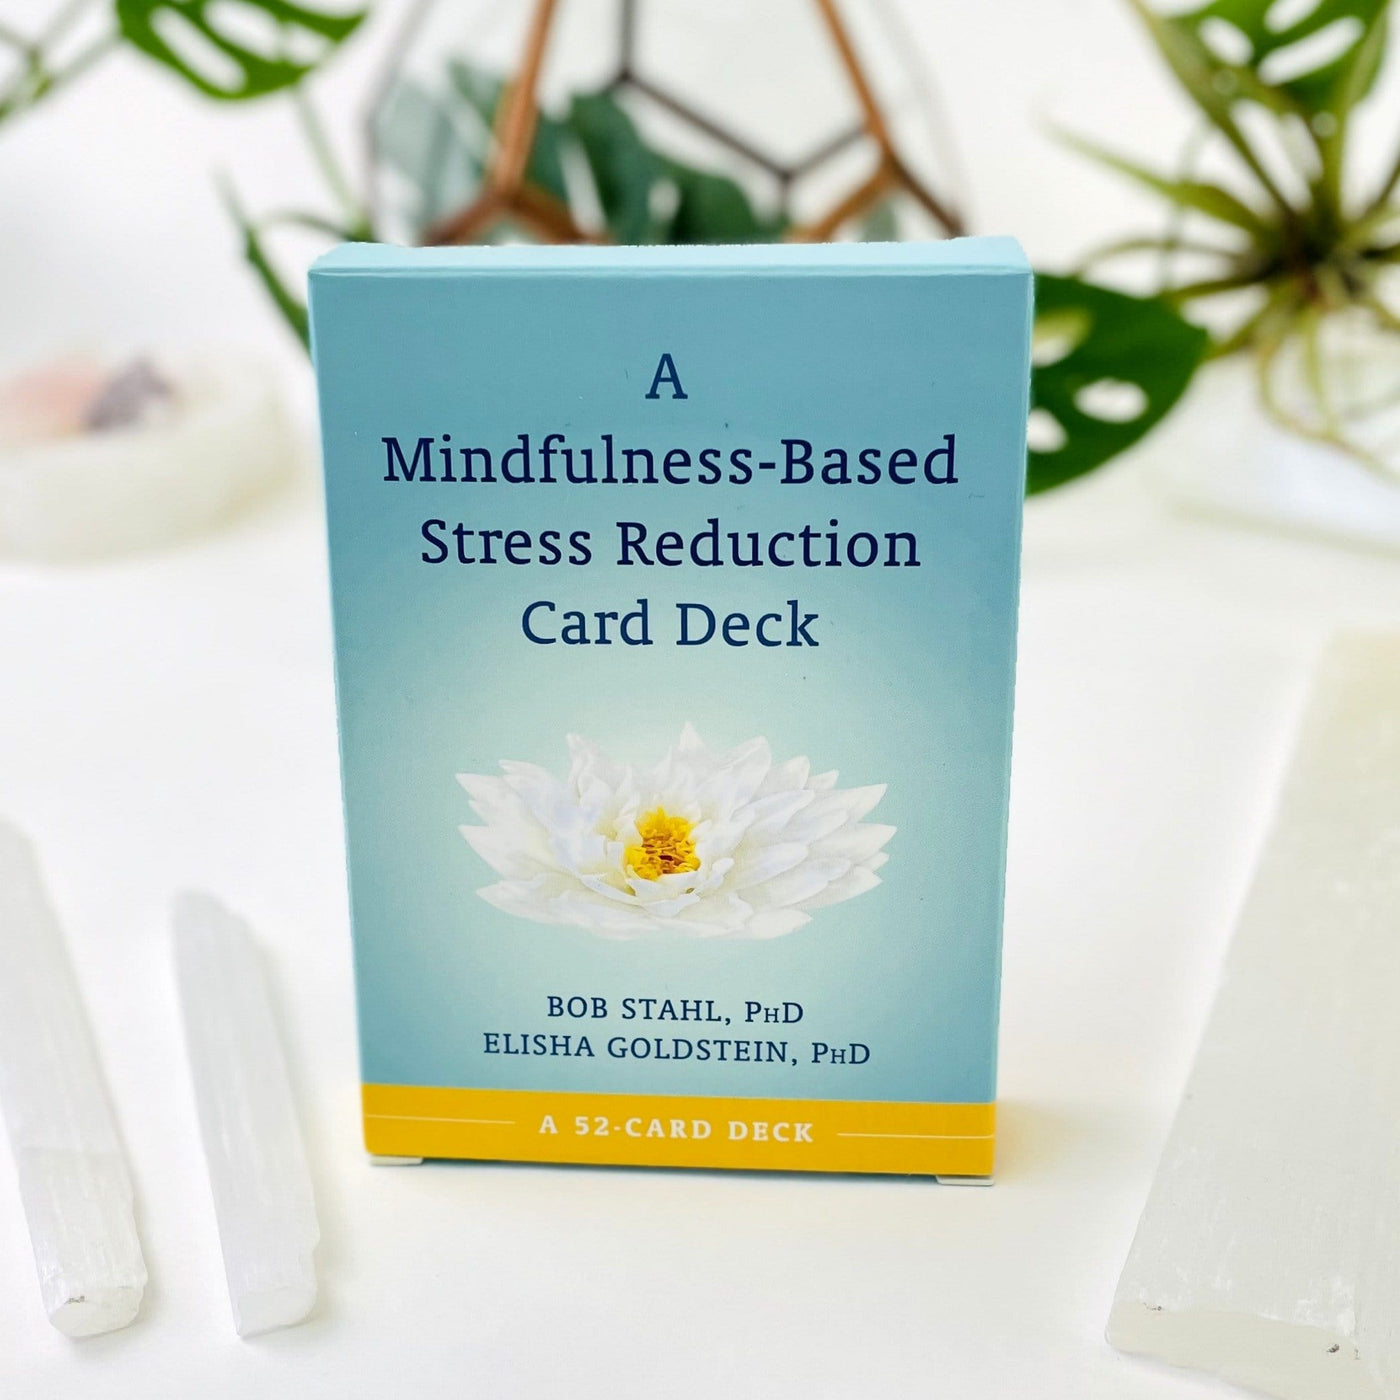 A Mindfulness-Based Stress Reduction Card Deck displayed in an alter showing the front cover.